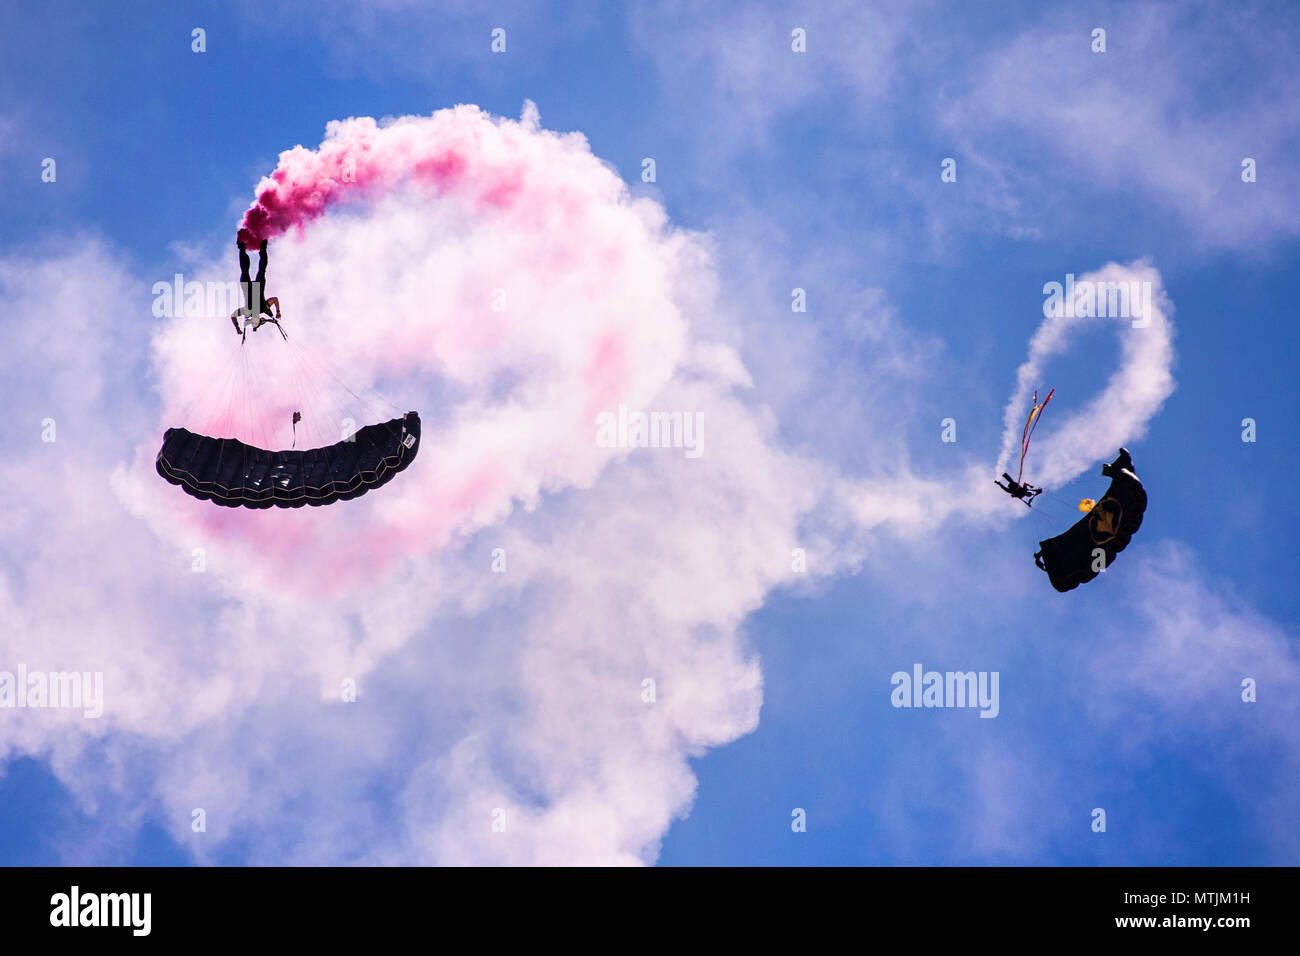 Two members of the U.S. Special Operations Command Para-Commandos parachute down during the Cannon Air Show, Space and Tech Fest at Cannon Air Force Base, N.M., May 26, 2018. The Para-Commandos are the only DoD Joint Service demonstration team consisting of members from every Military Service in SOCOM. (U.S. Air Force photo by Senior Airman Luke Kitterman/Released) Stock Photo